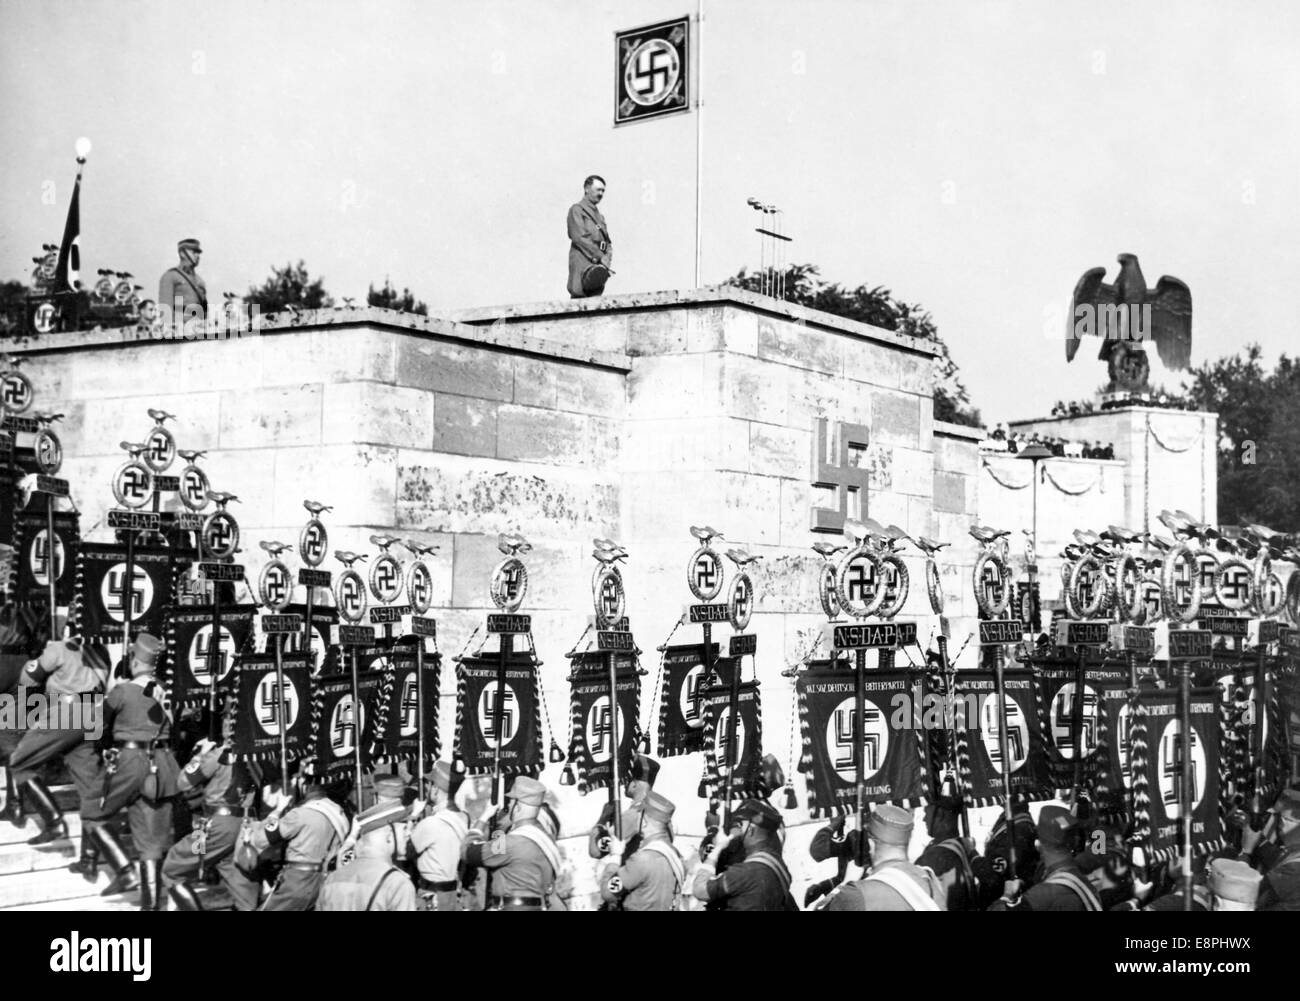 Nuremberg Rally in Nuremberg, Germany - March-past of the standards past Adolf Hitler and their setting up on the stands for the great roll call of Sturmabteilung (SA), Schutzstaffel (SS), National Socialist Motor Corps (NSKK), and National Socialist Flyers Corps (NSFK) in Luitpoldarena at the Nazi party rally grounds. (Flaws in quality due to the historic picture copy) Fotoarchiv für Zeitgeschichtee - NO WIRE SERVICE - Stock Photo